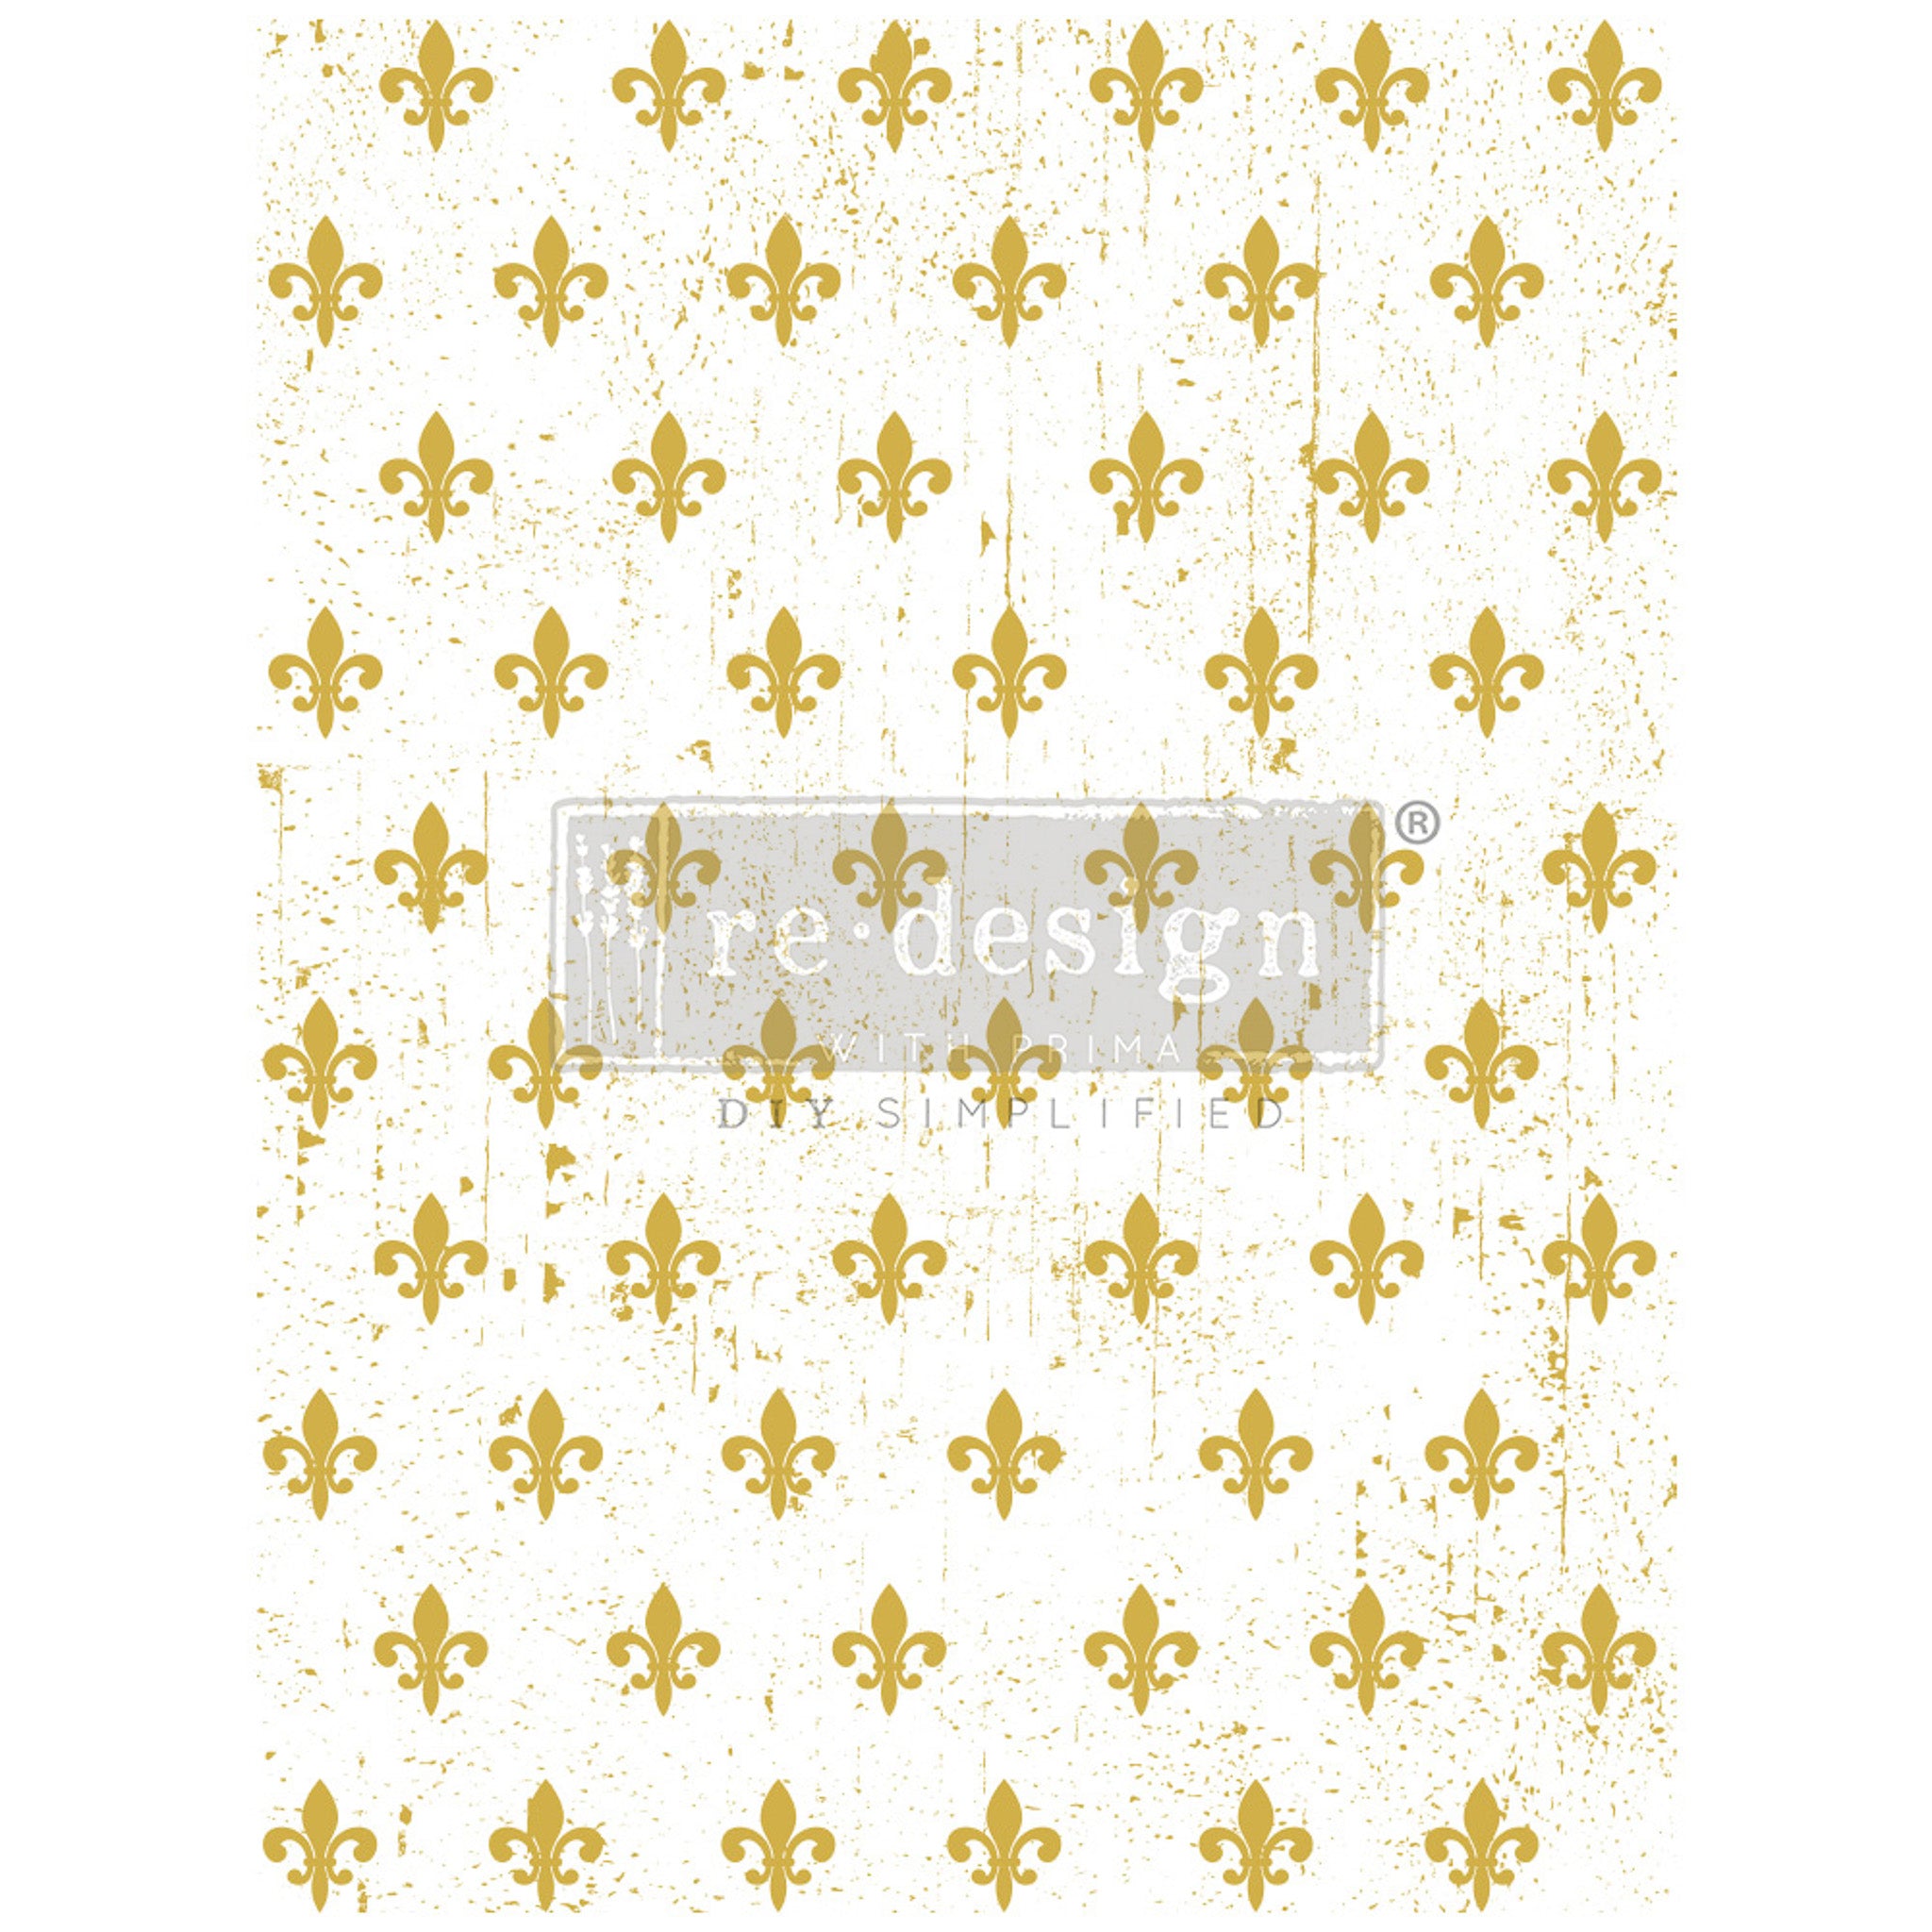 Rub-on transfer design that features a repeating pattern of gold foil Fleur de Lis.